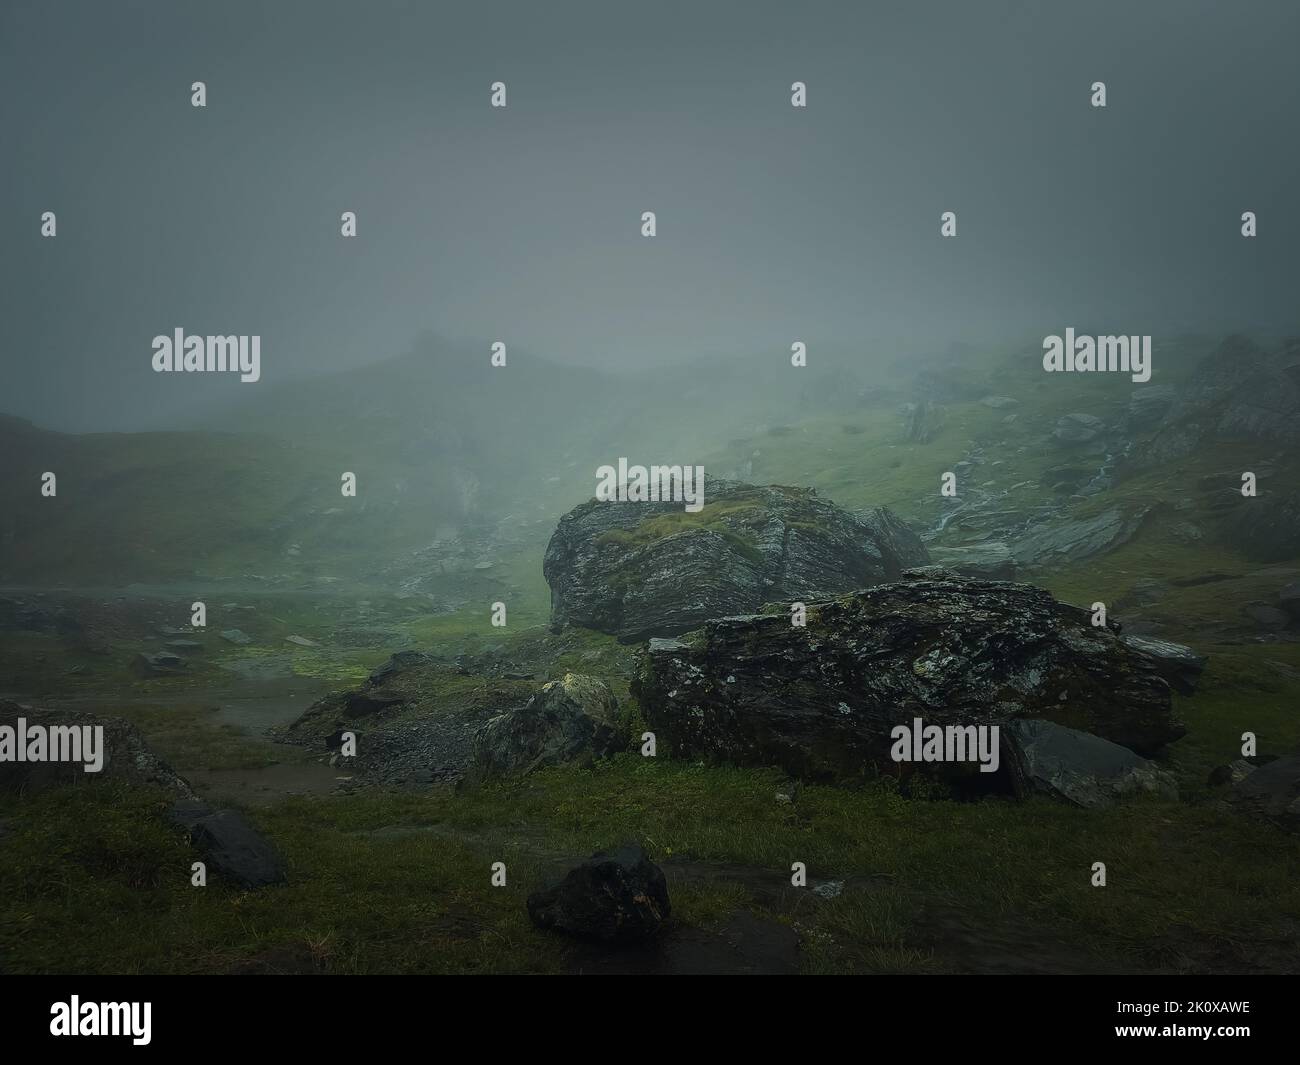 Big mountain rocks and boulders seen through the dense mist. Moody hiking scene with rainy weather Stock Photo